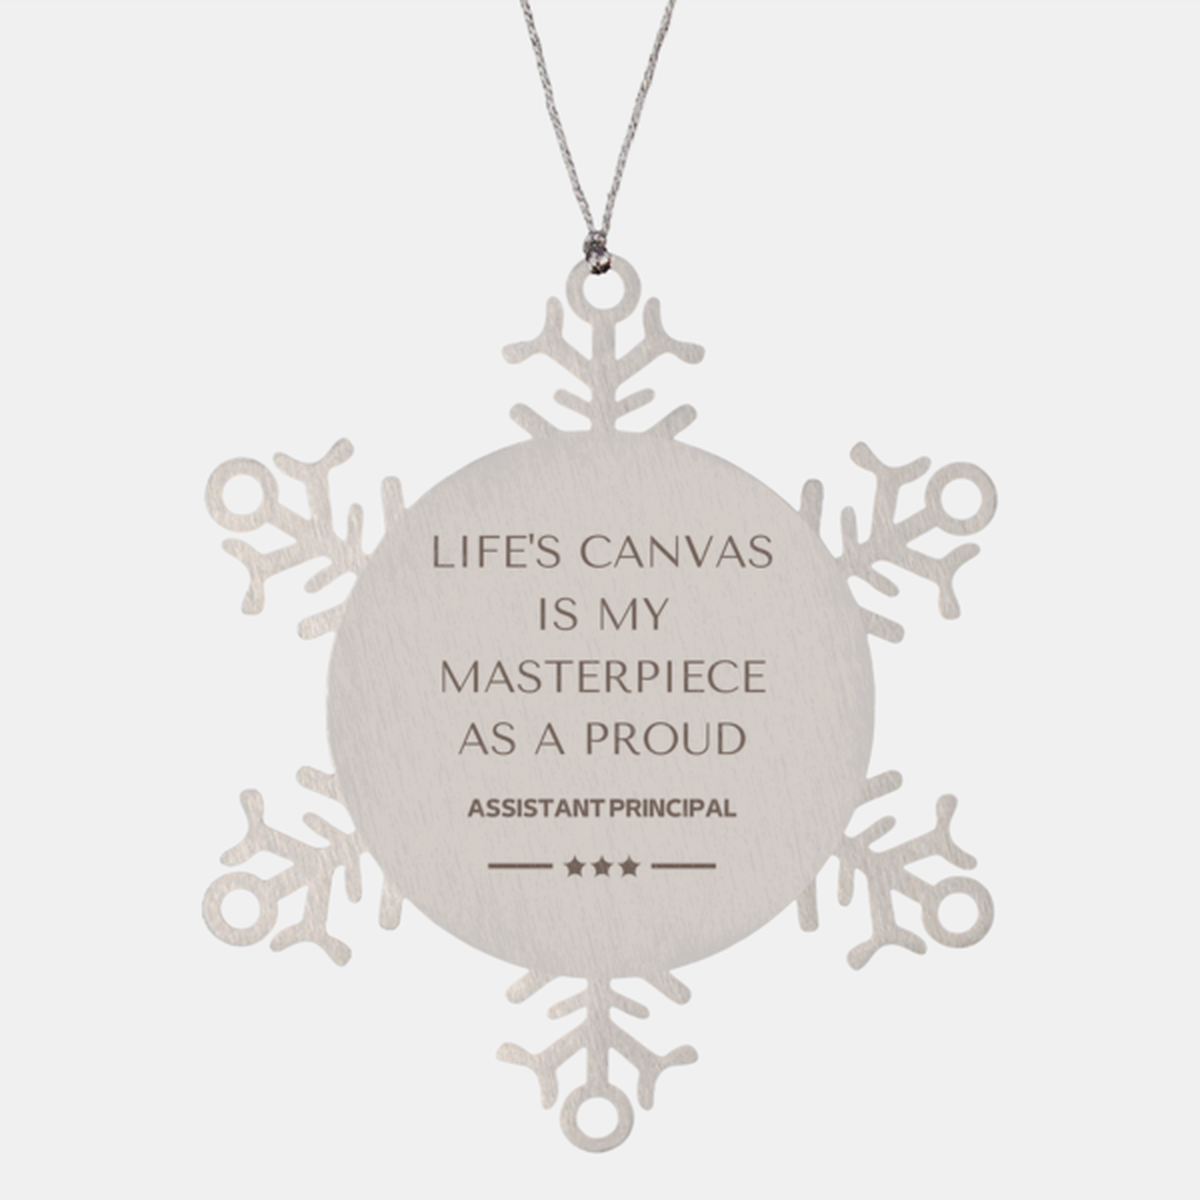 Proud Assistant Principal Gifts, Life's canvas is my masterpiece, Epic Birthday Christmas Unique Snowflake Ornament For Assistant Principal, Coworkers, Men, Women, Friends